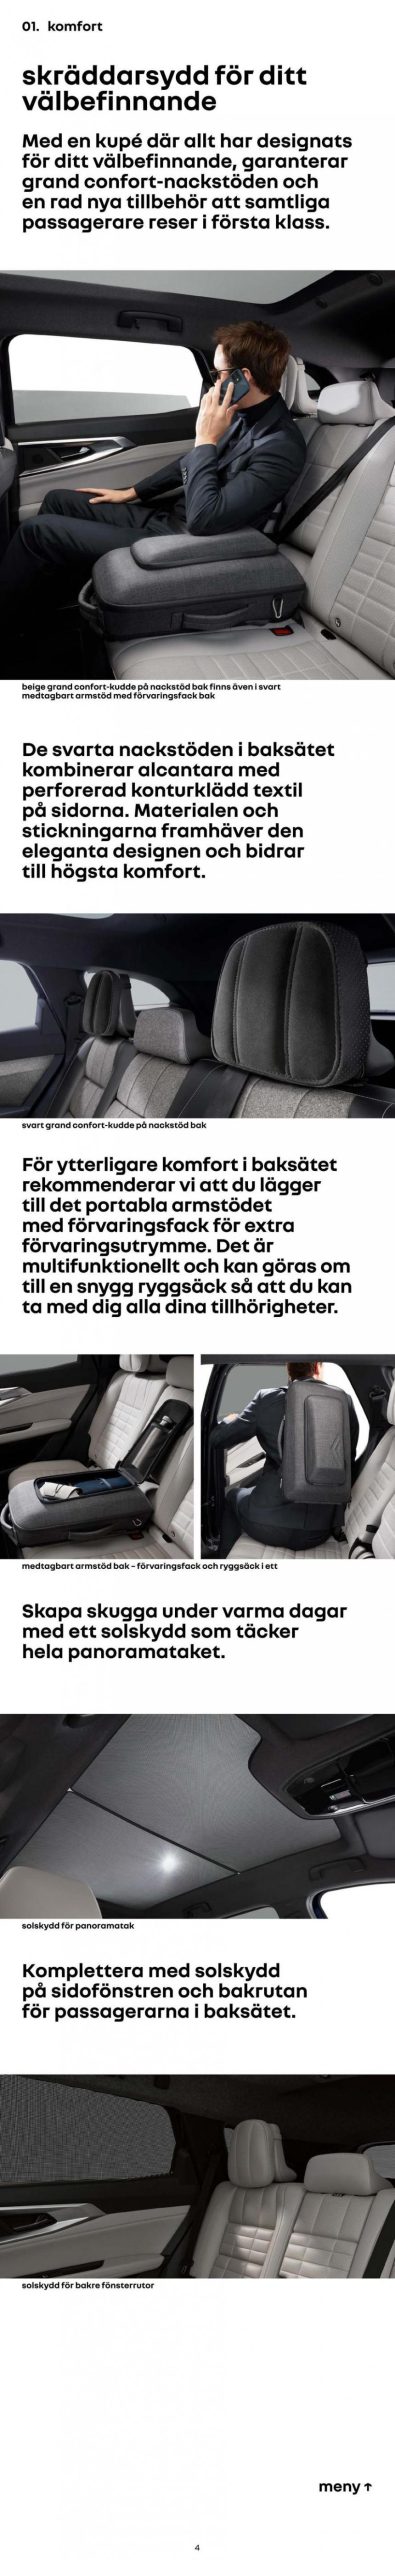 Renault Espace. Page 4